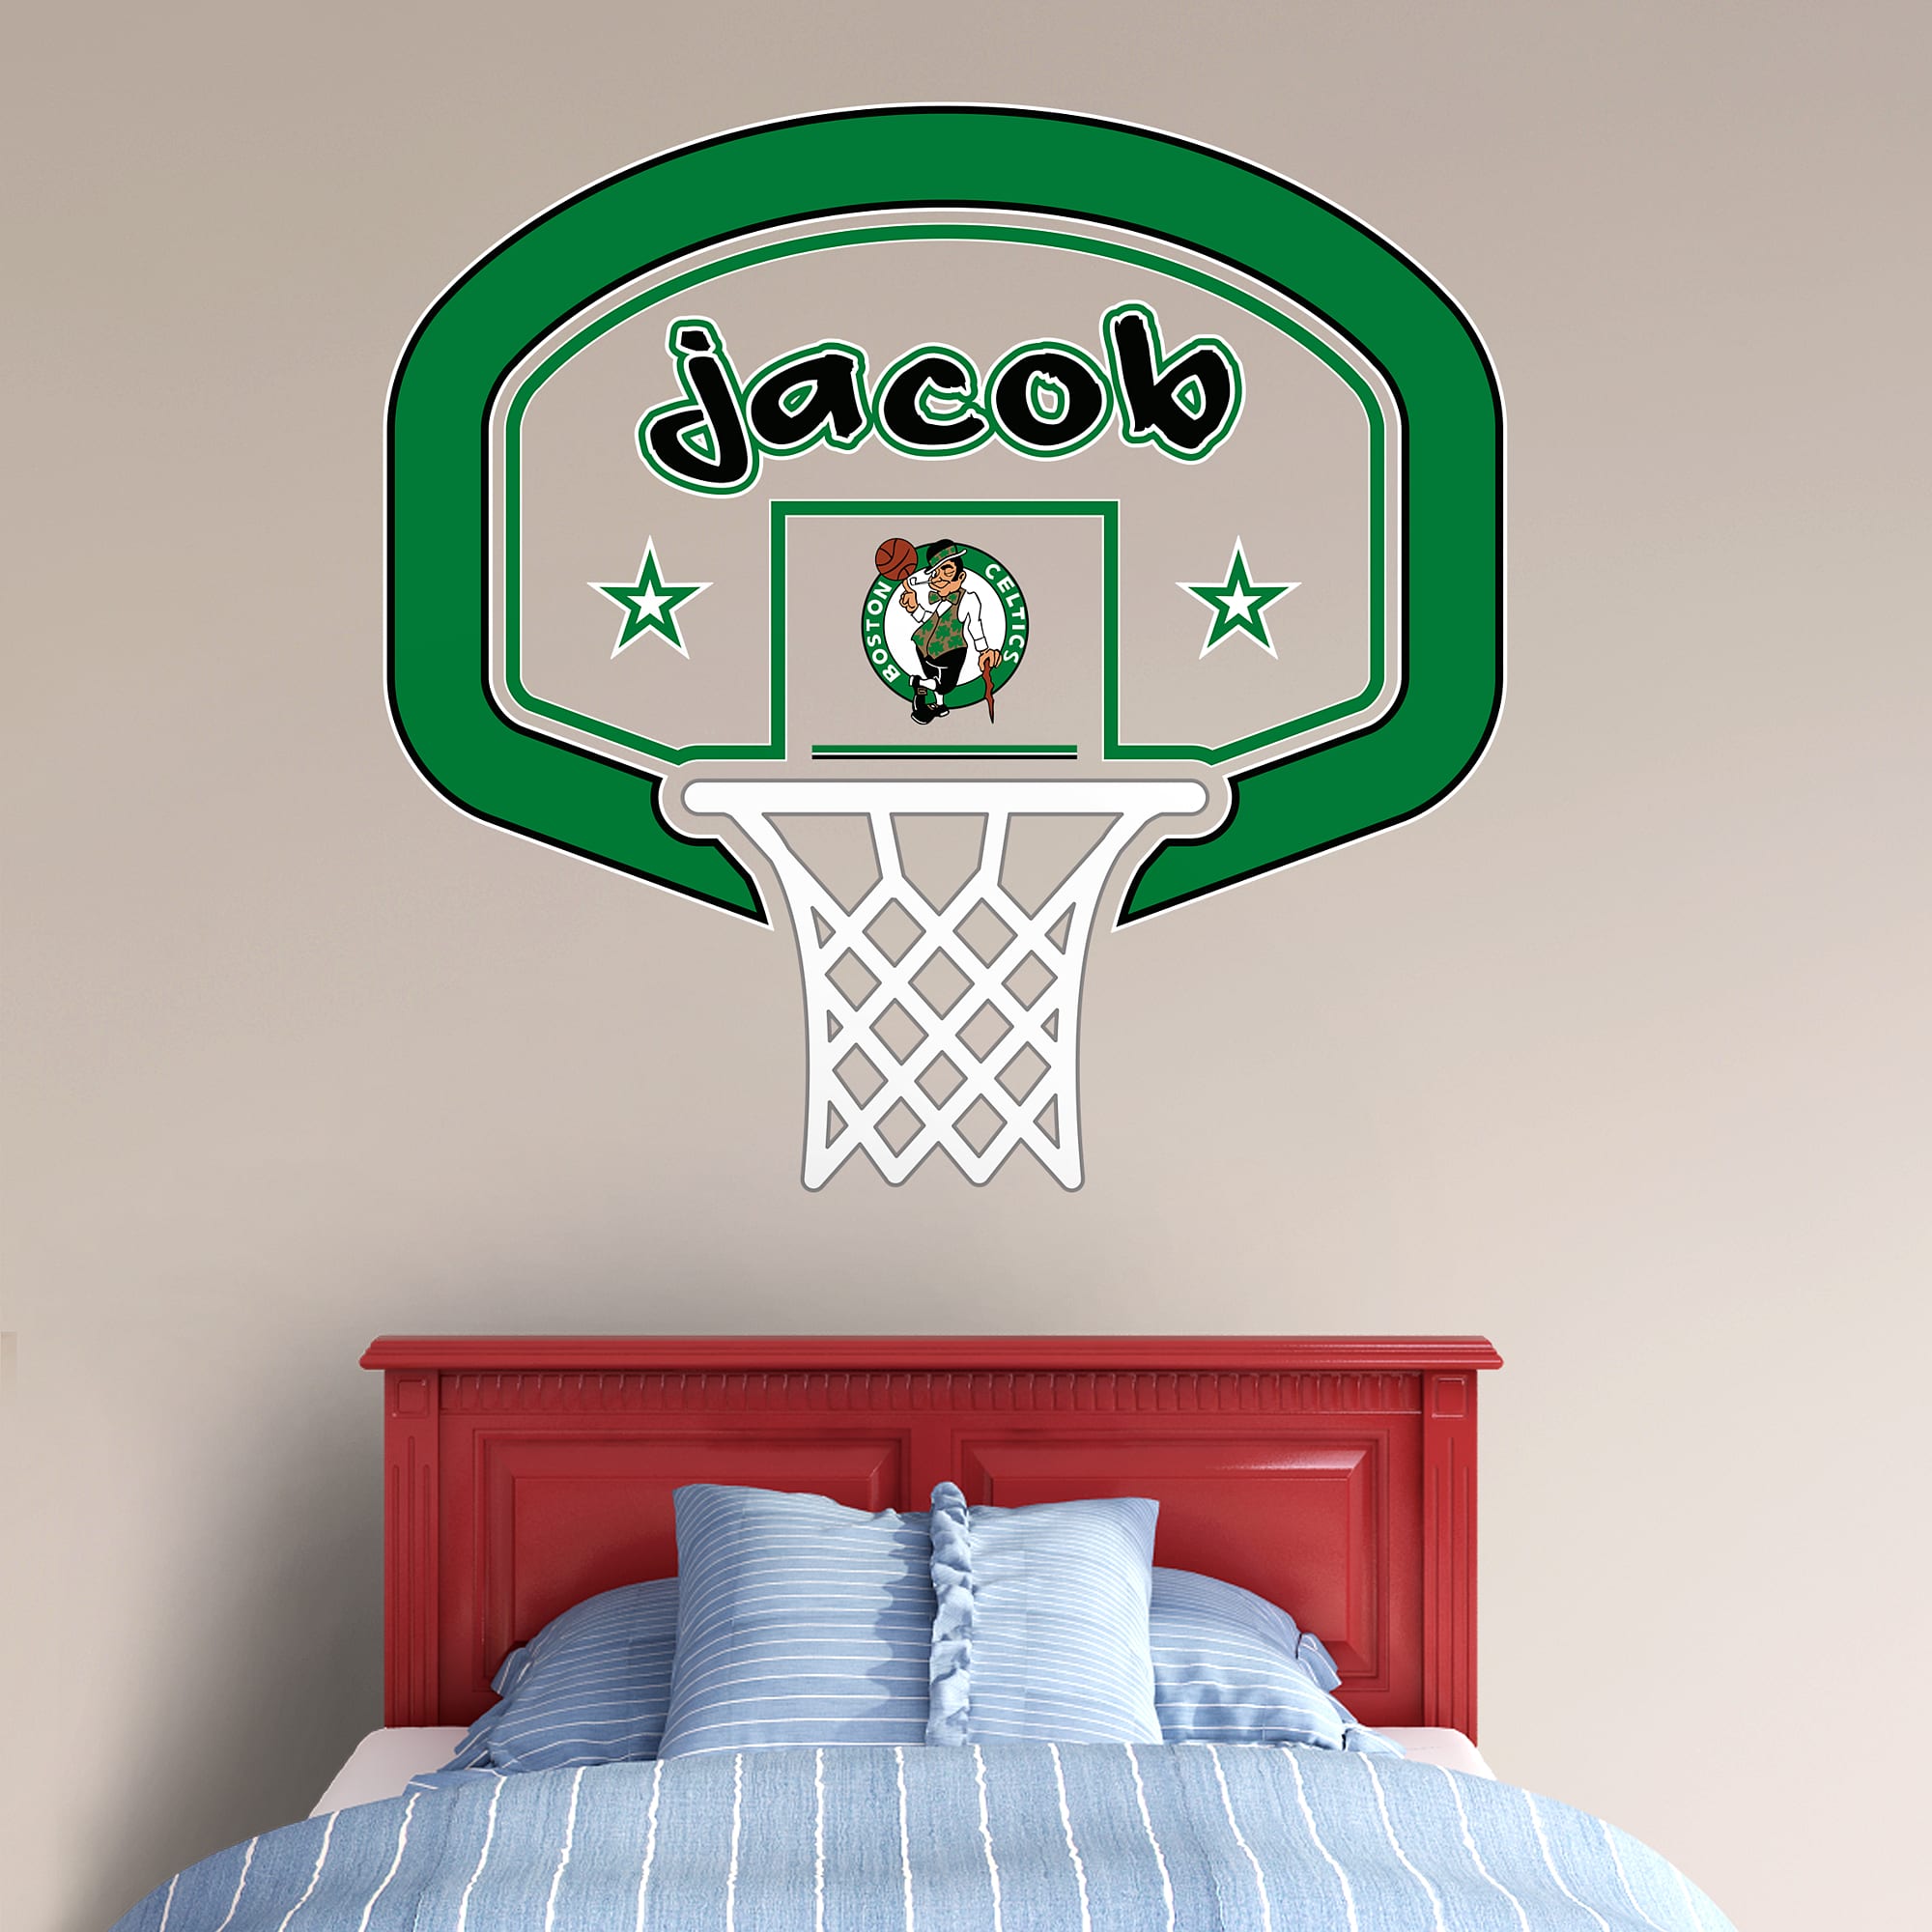 Boston Celtics: Personalized Name - Officially Licensed NBA Transfer Decal 52.0"W x 39.5"H by Fathead | Vinyl